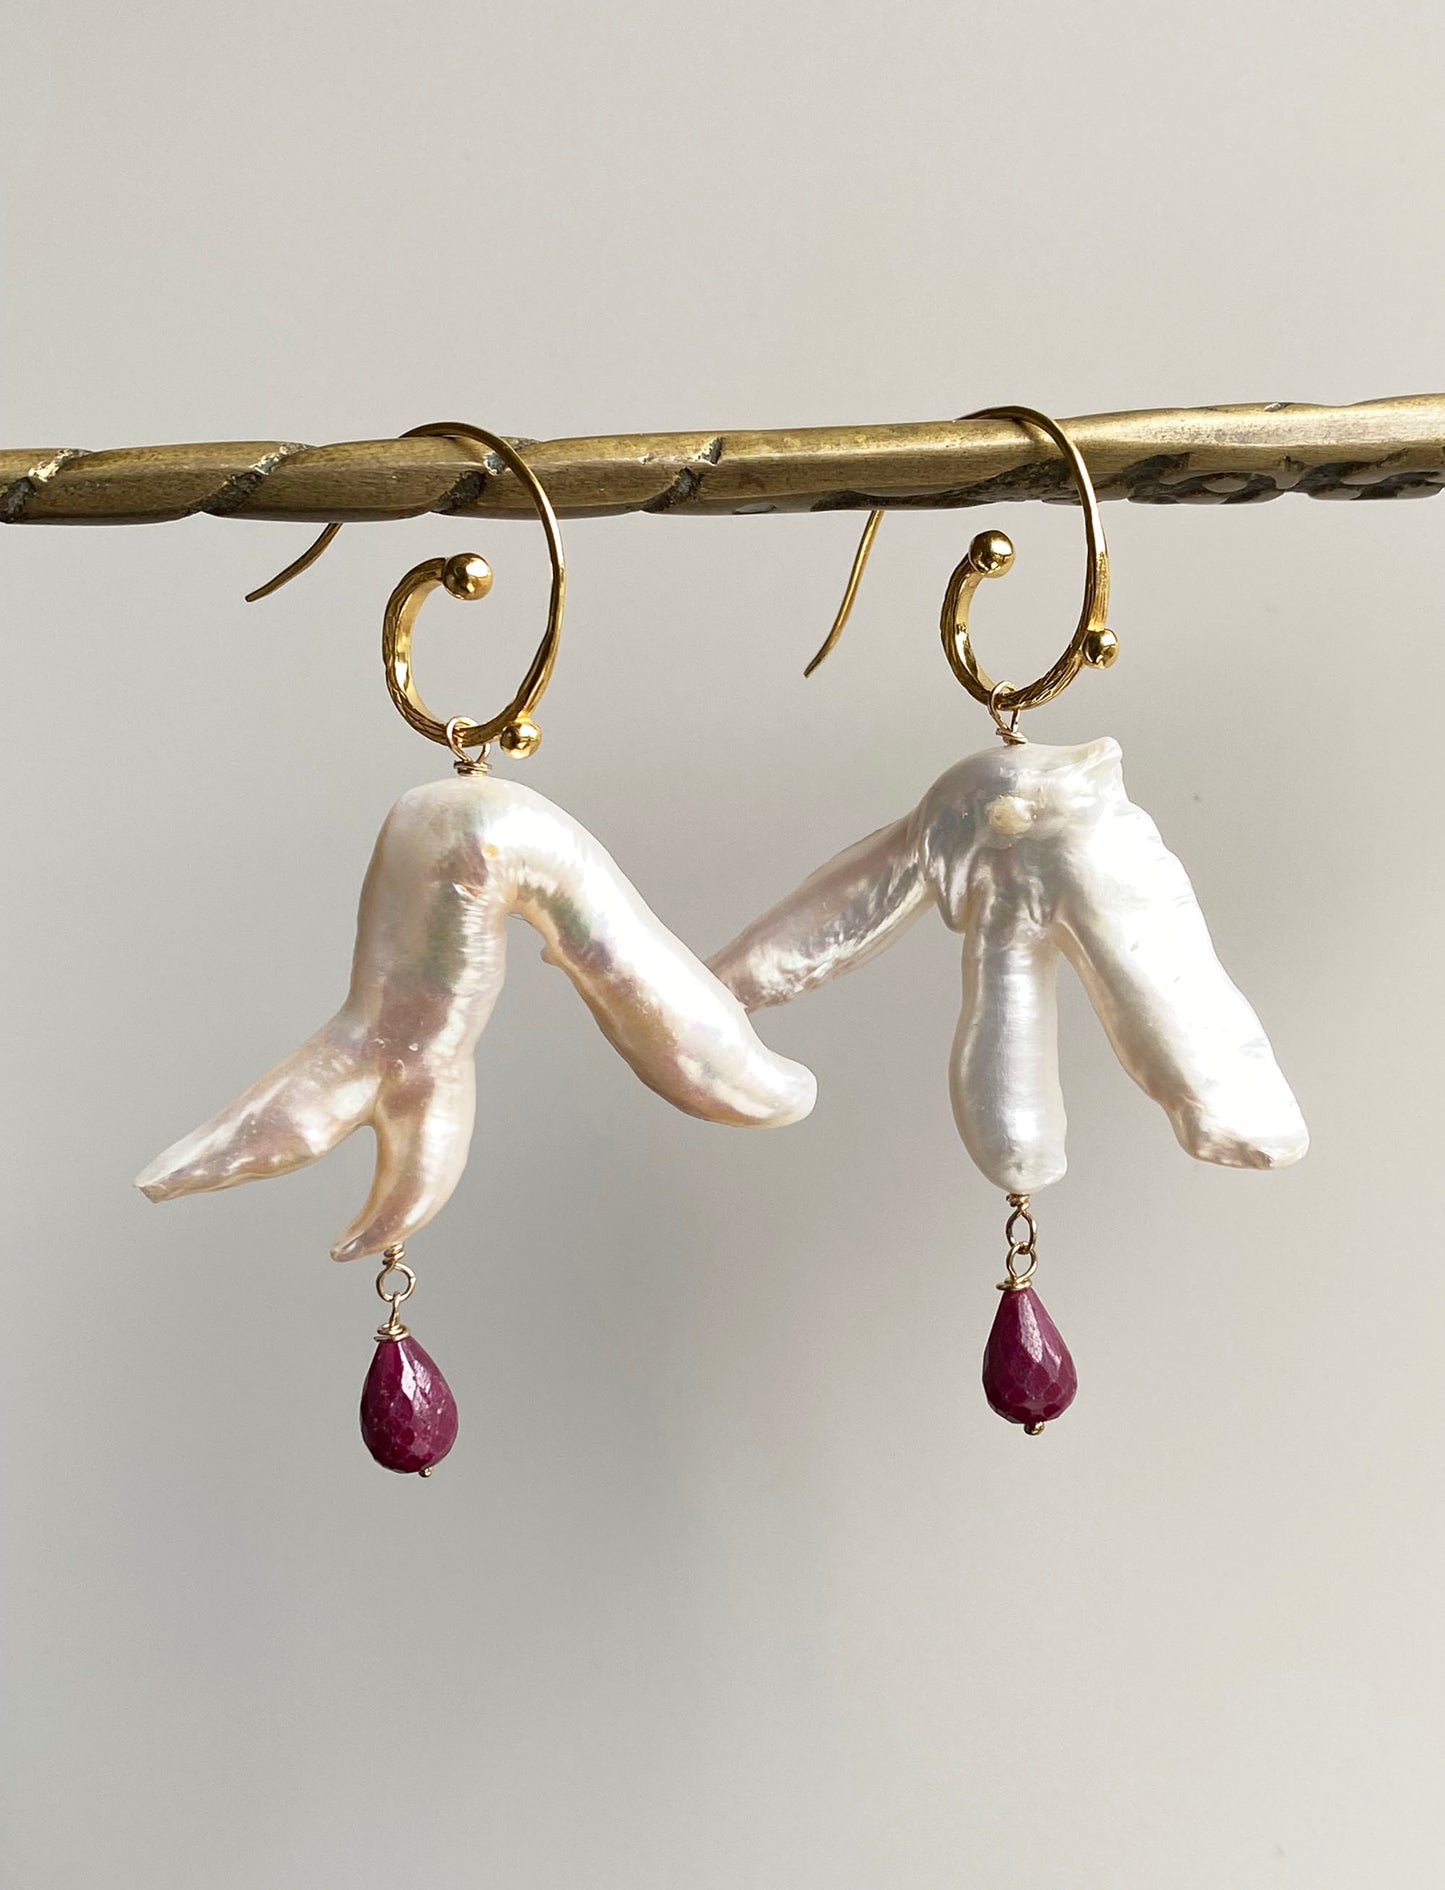 Stunning Baroque Branch Pearls with Ruby Drop on Gold Vermeil Spiral Ear Wires